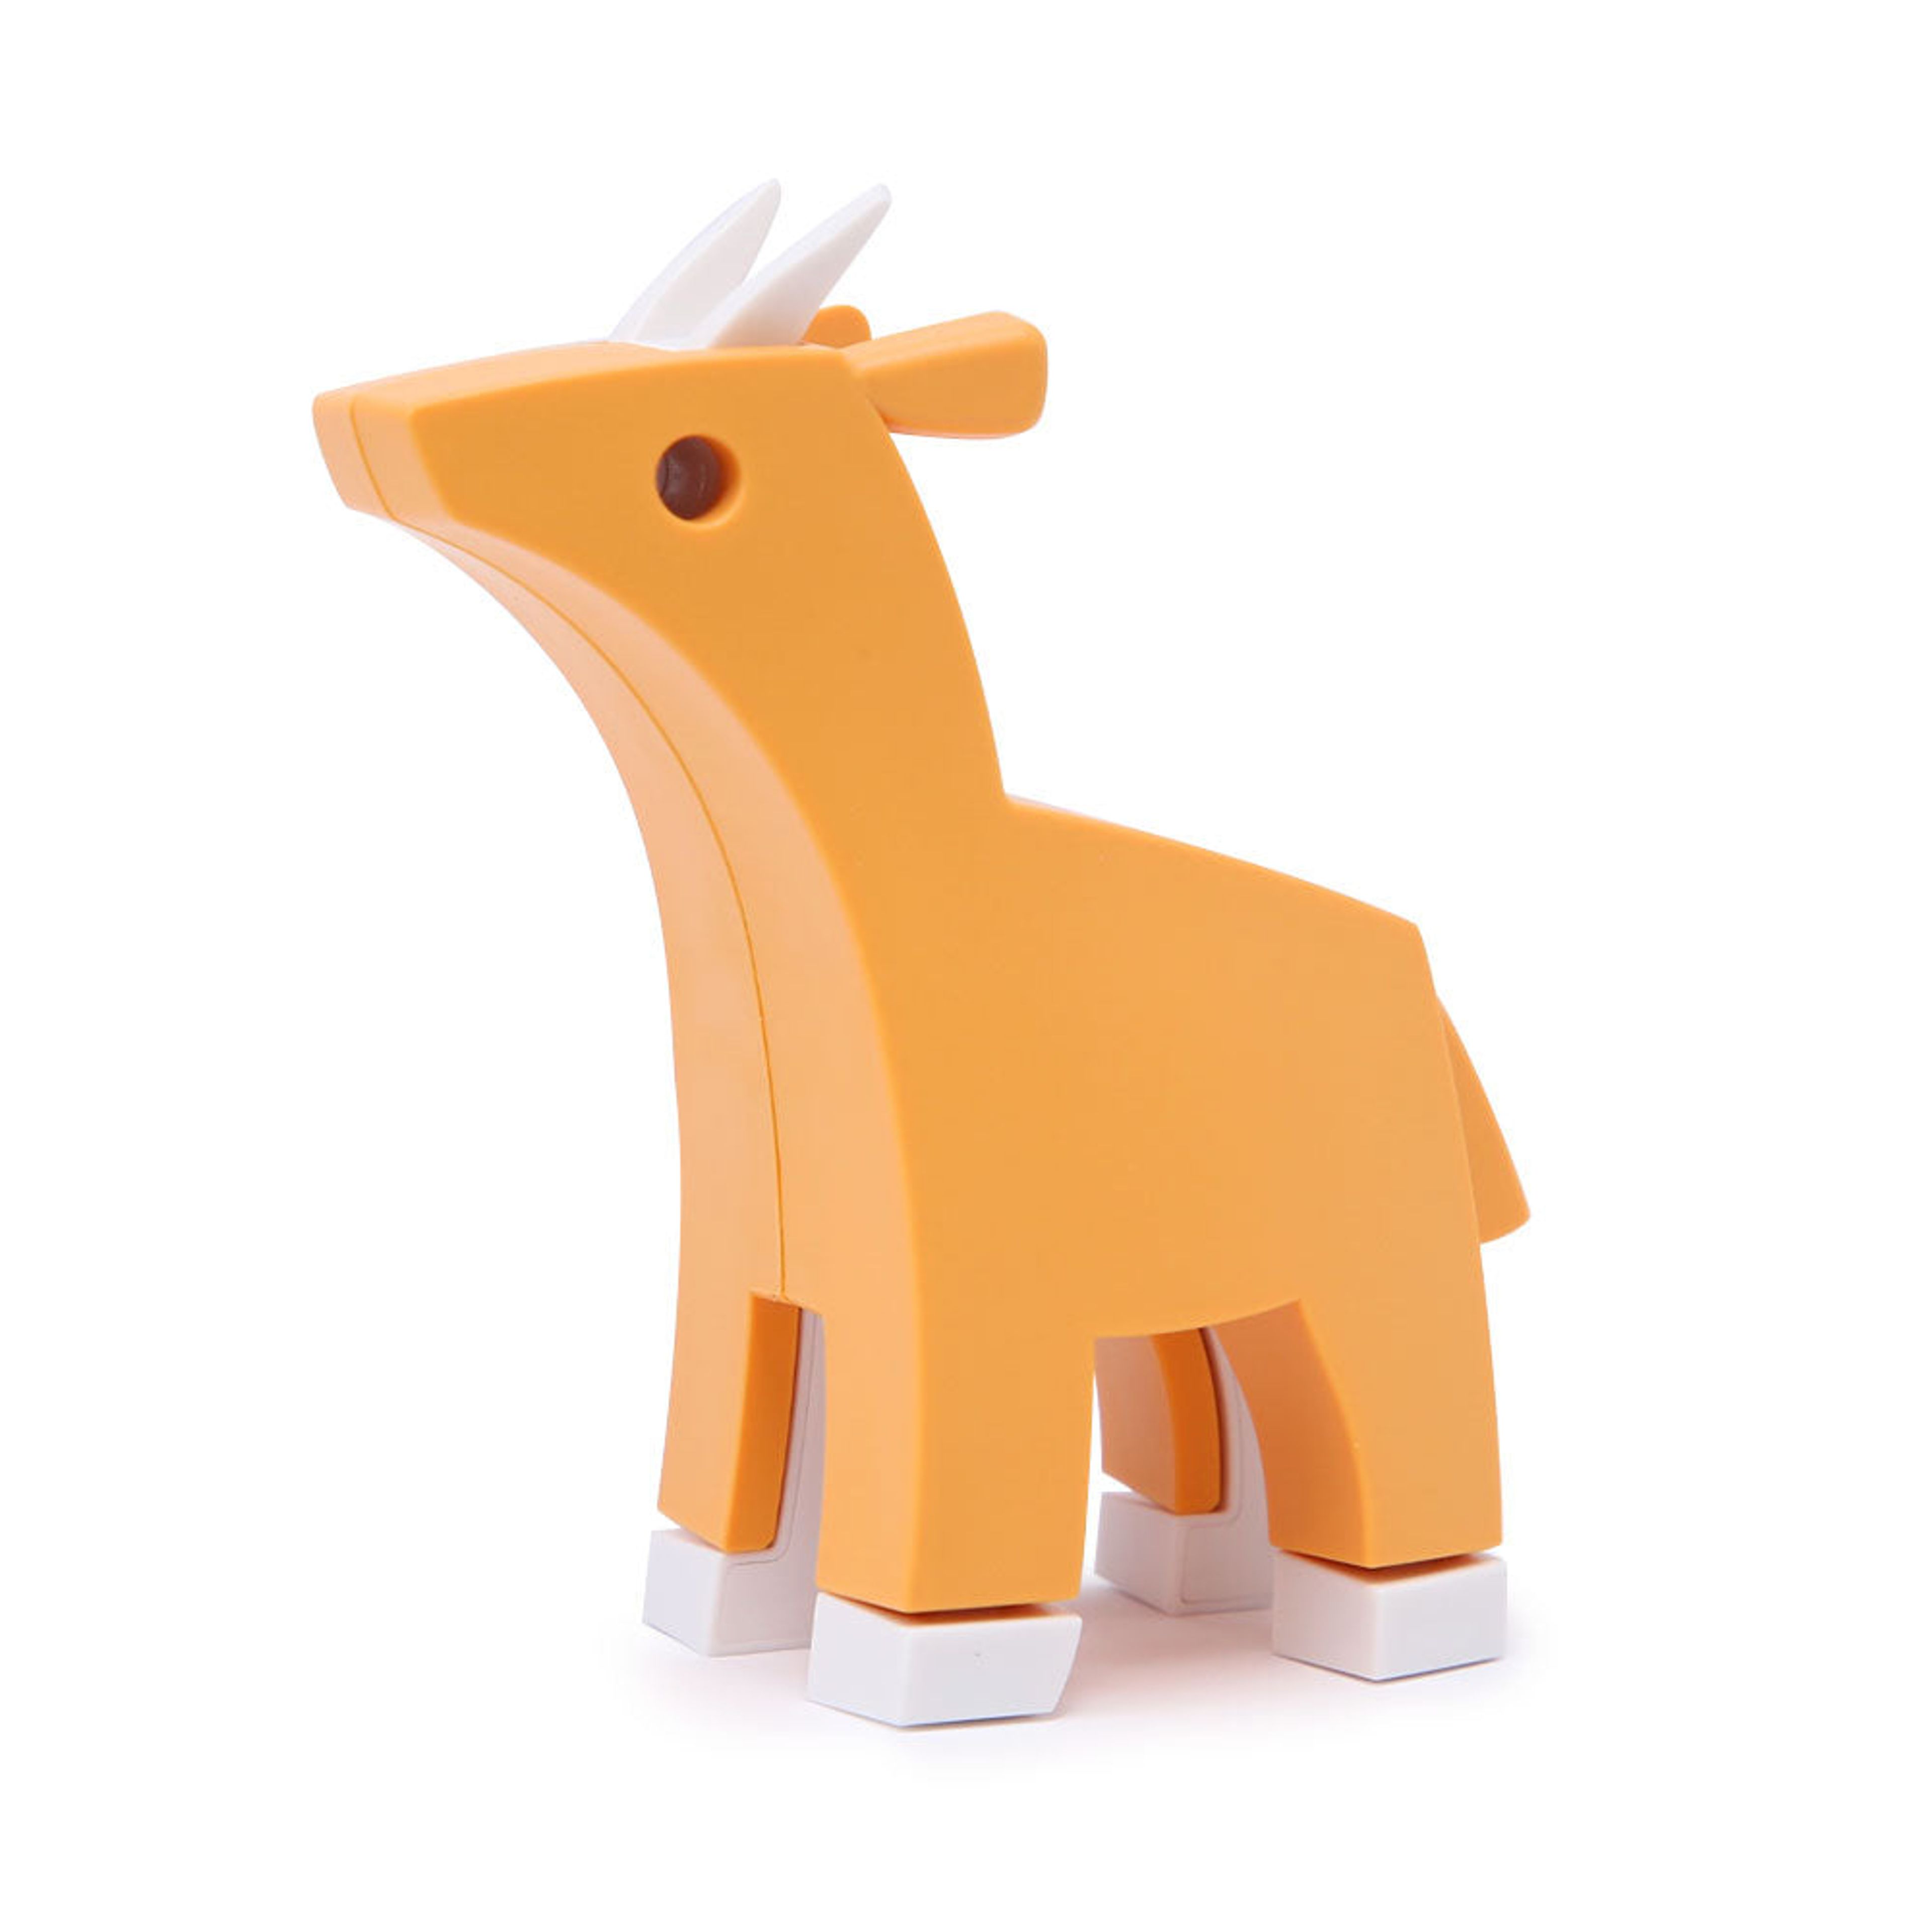 www.learnplay.com/products/halftoys-animal-impala-collectible-set-ha002